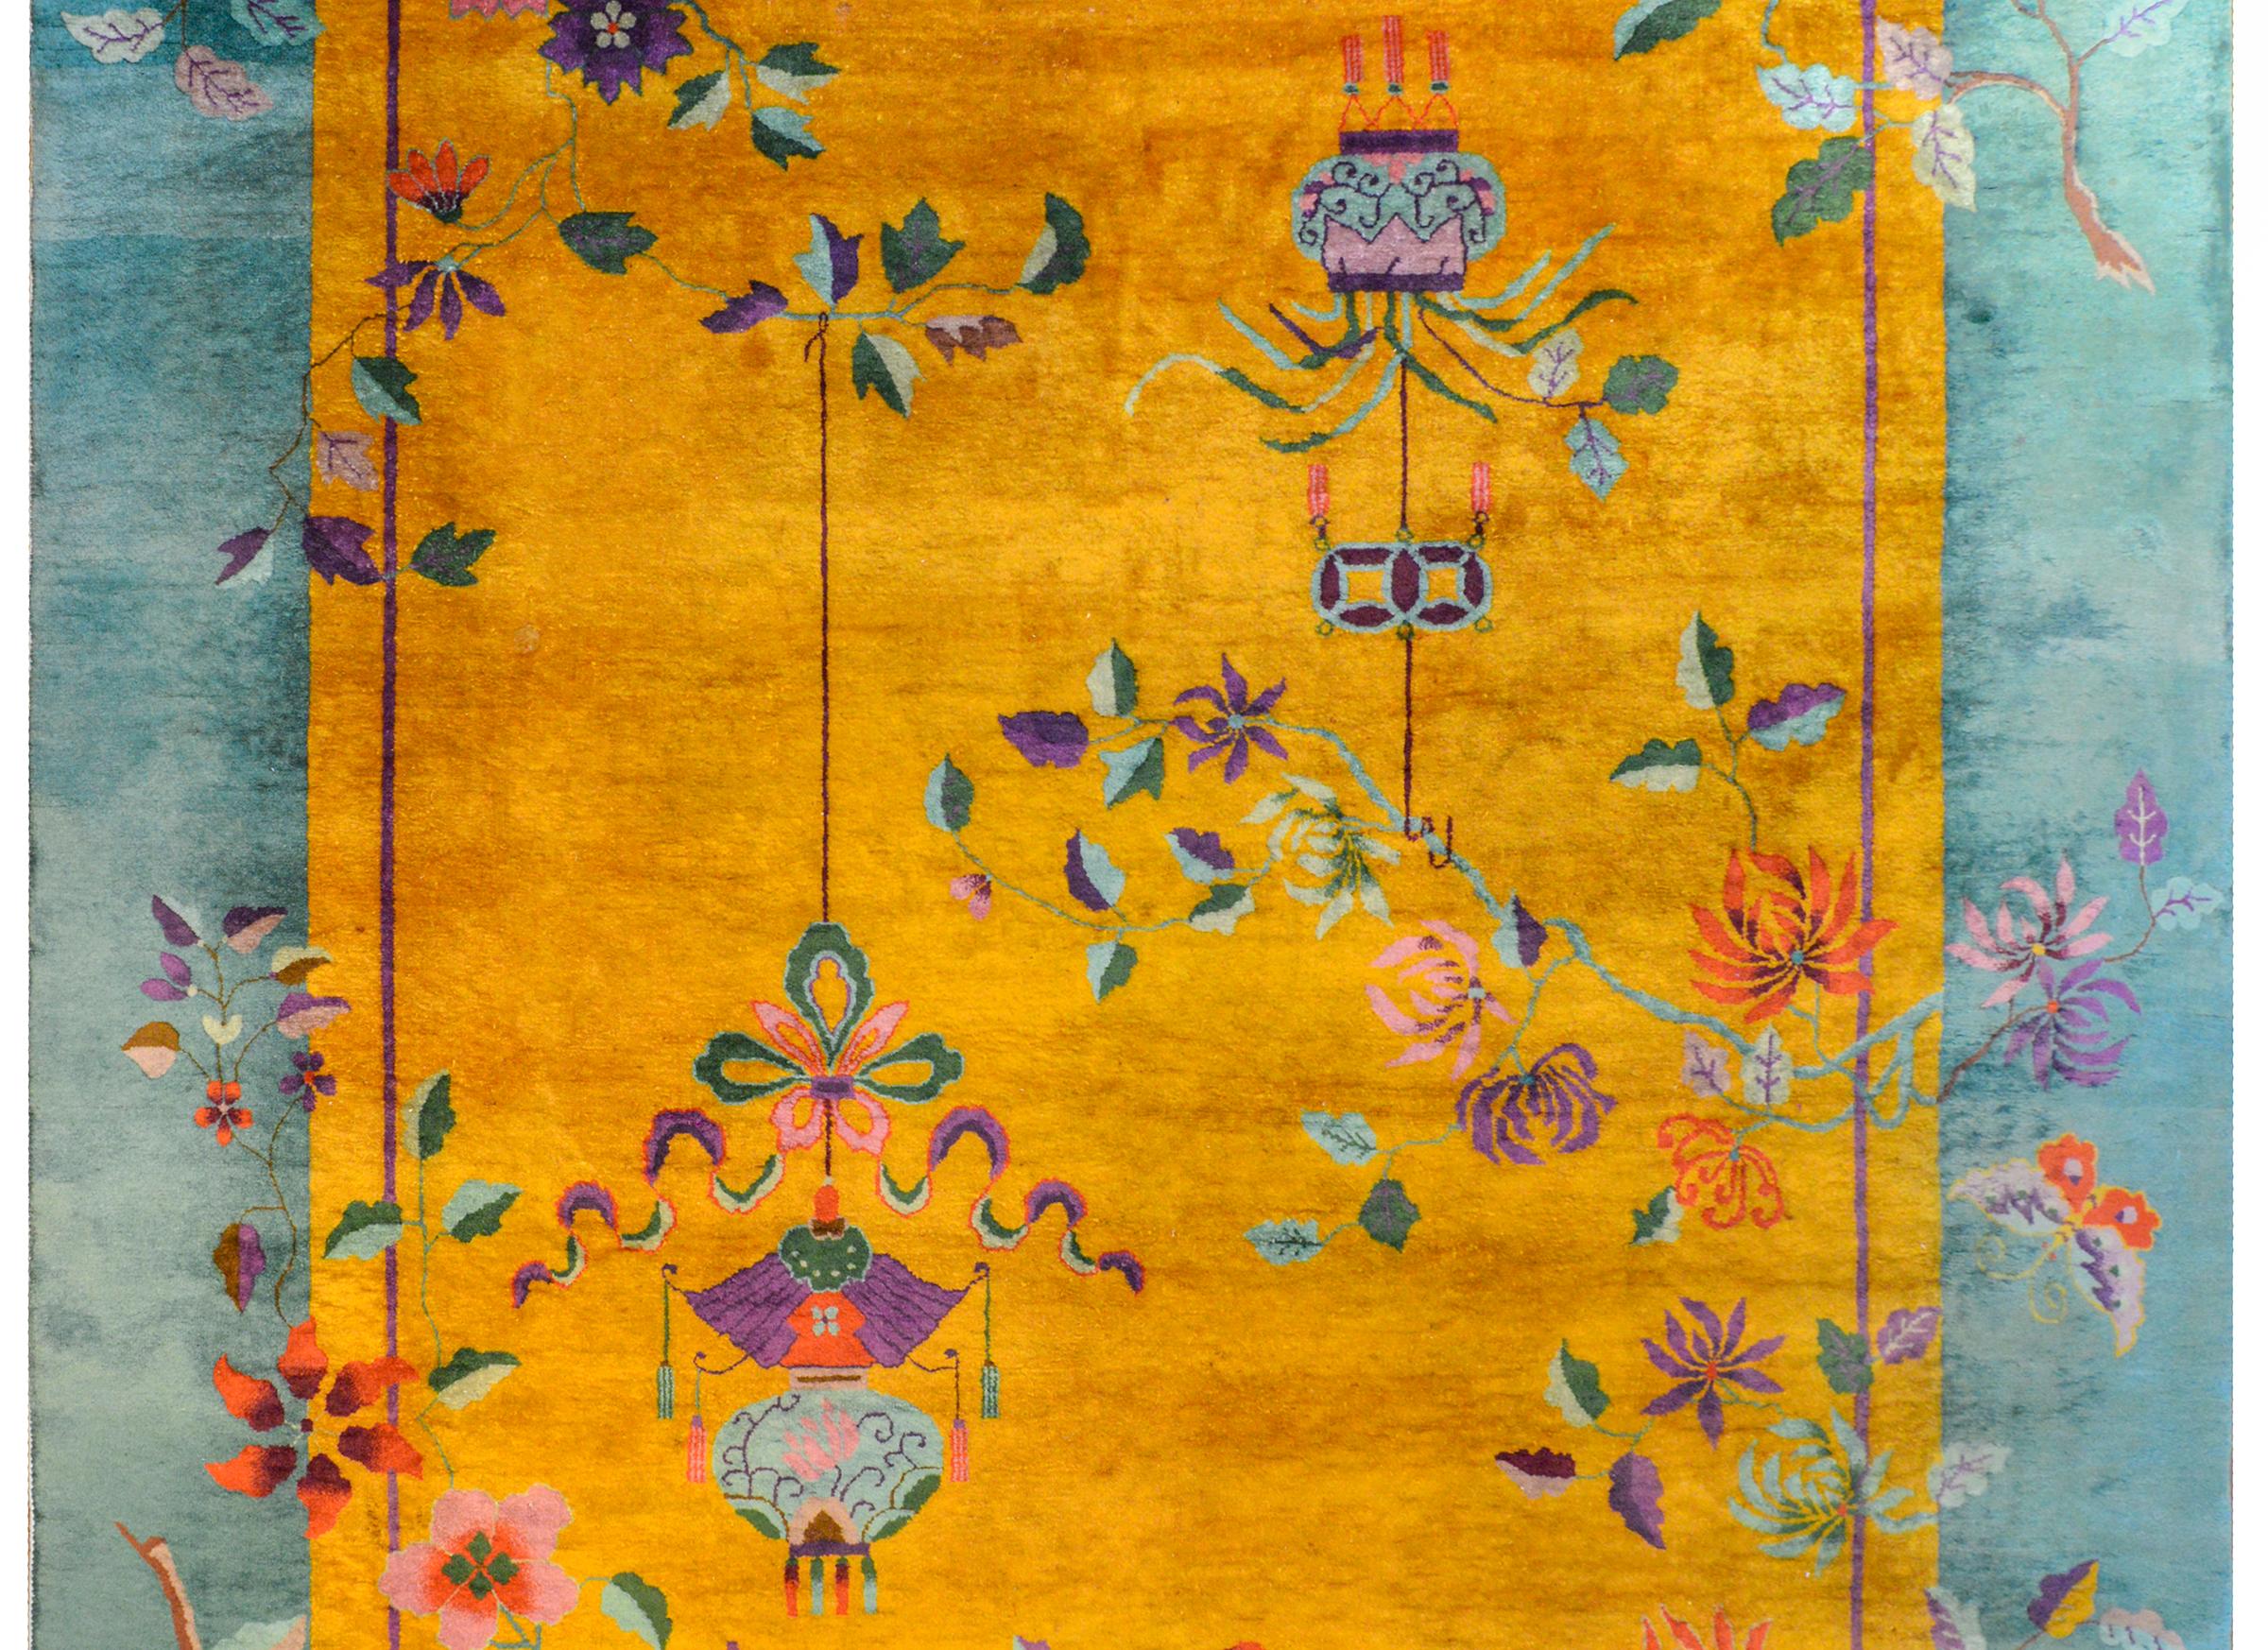 A vivid early 20th century Chinese Art Deco rug with an incredible brilliant goldenrod field surrounded by a wide teal border and all overlaid with myriad auspicious flowers including chrysanthemums, peonies, and cherry blossoms with two potted